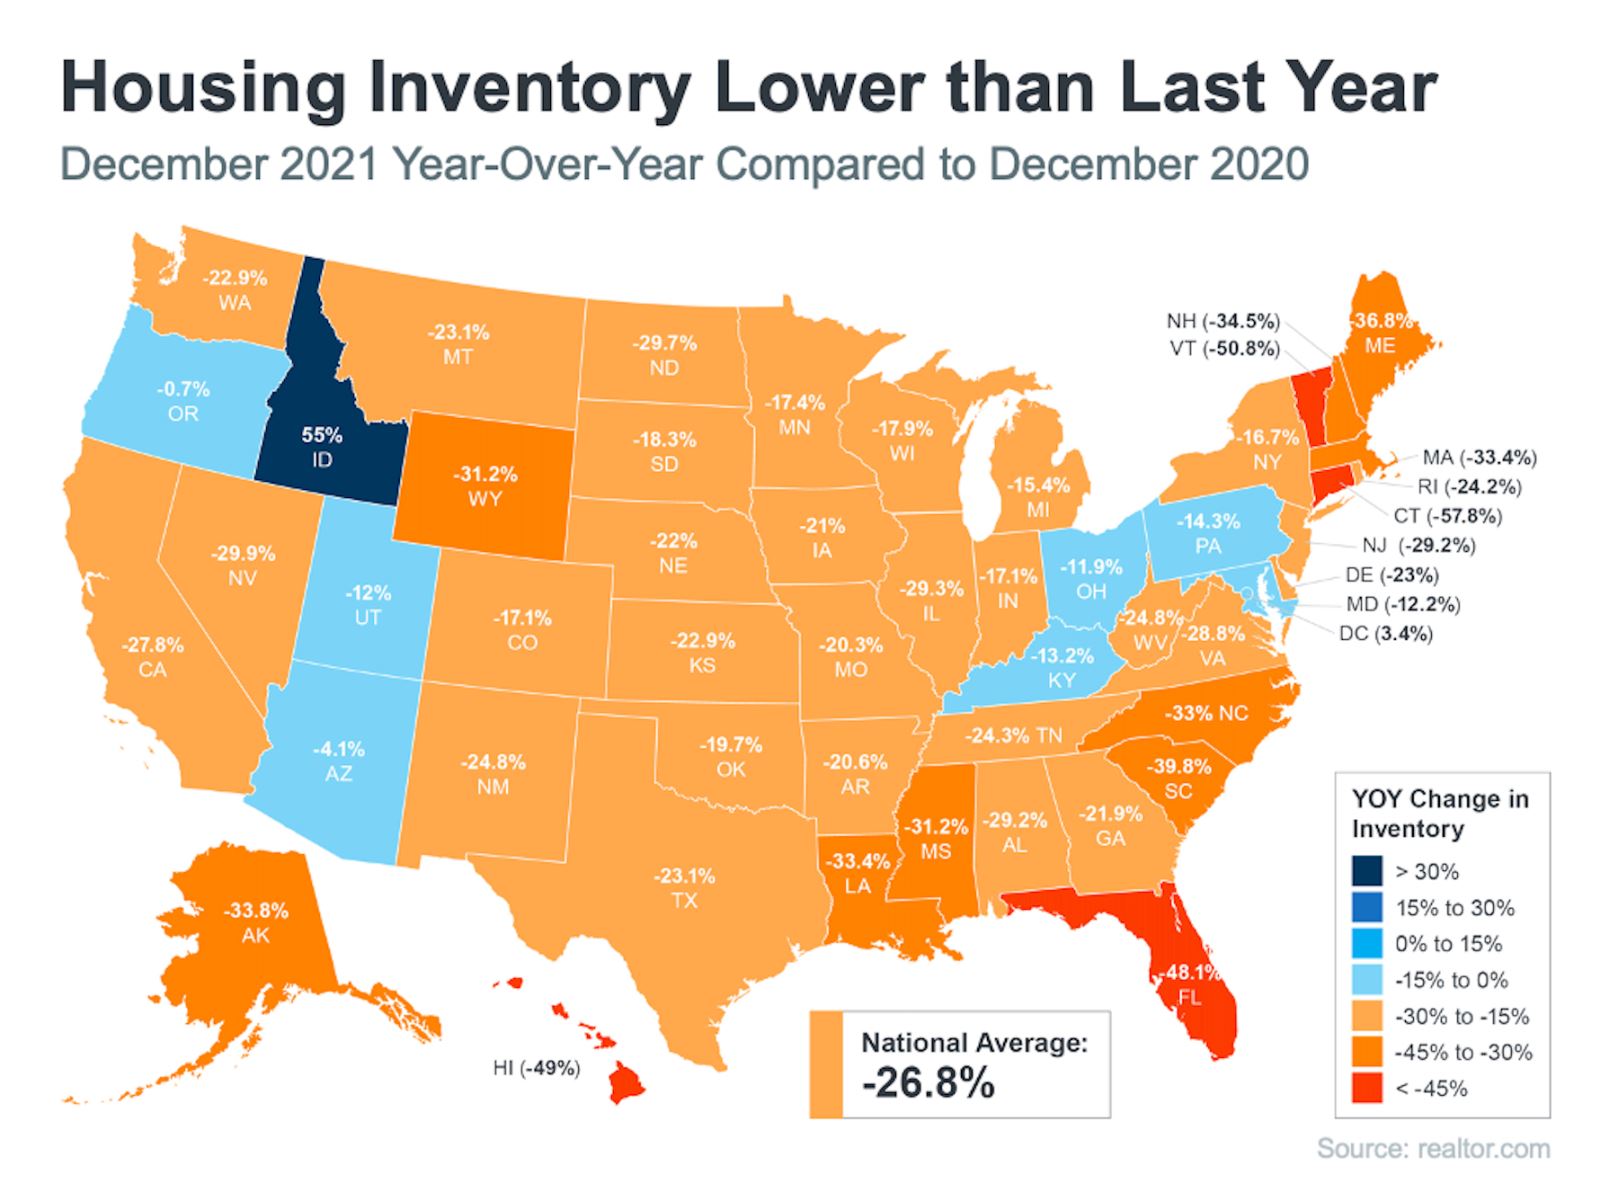 Nation Wide Lack of Inventory